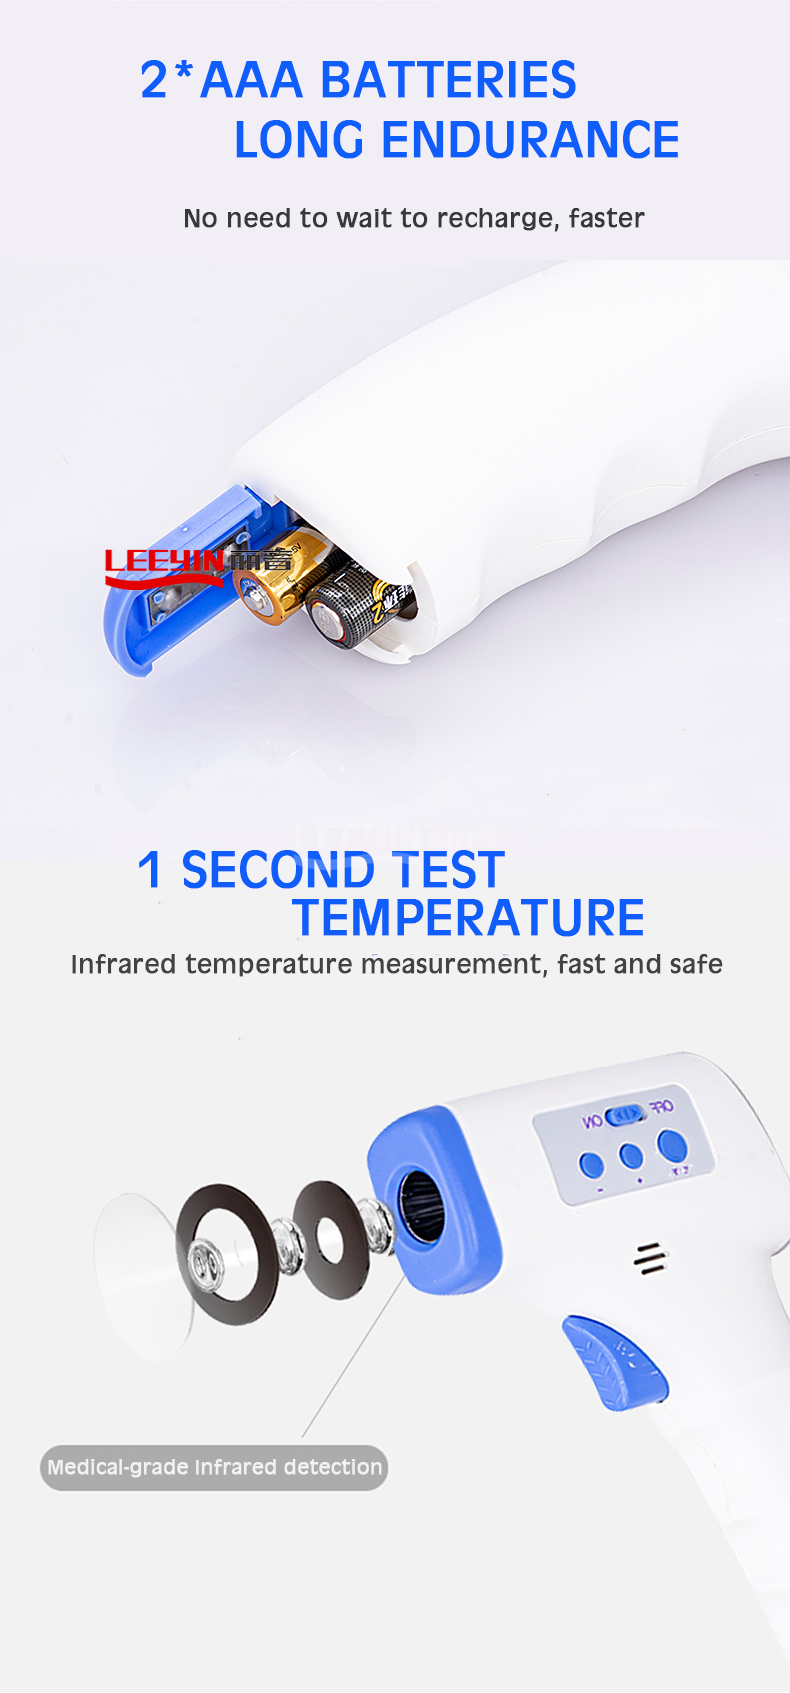 Non-Contact Infrared thermometer